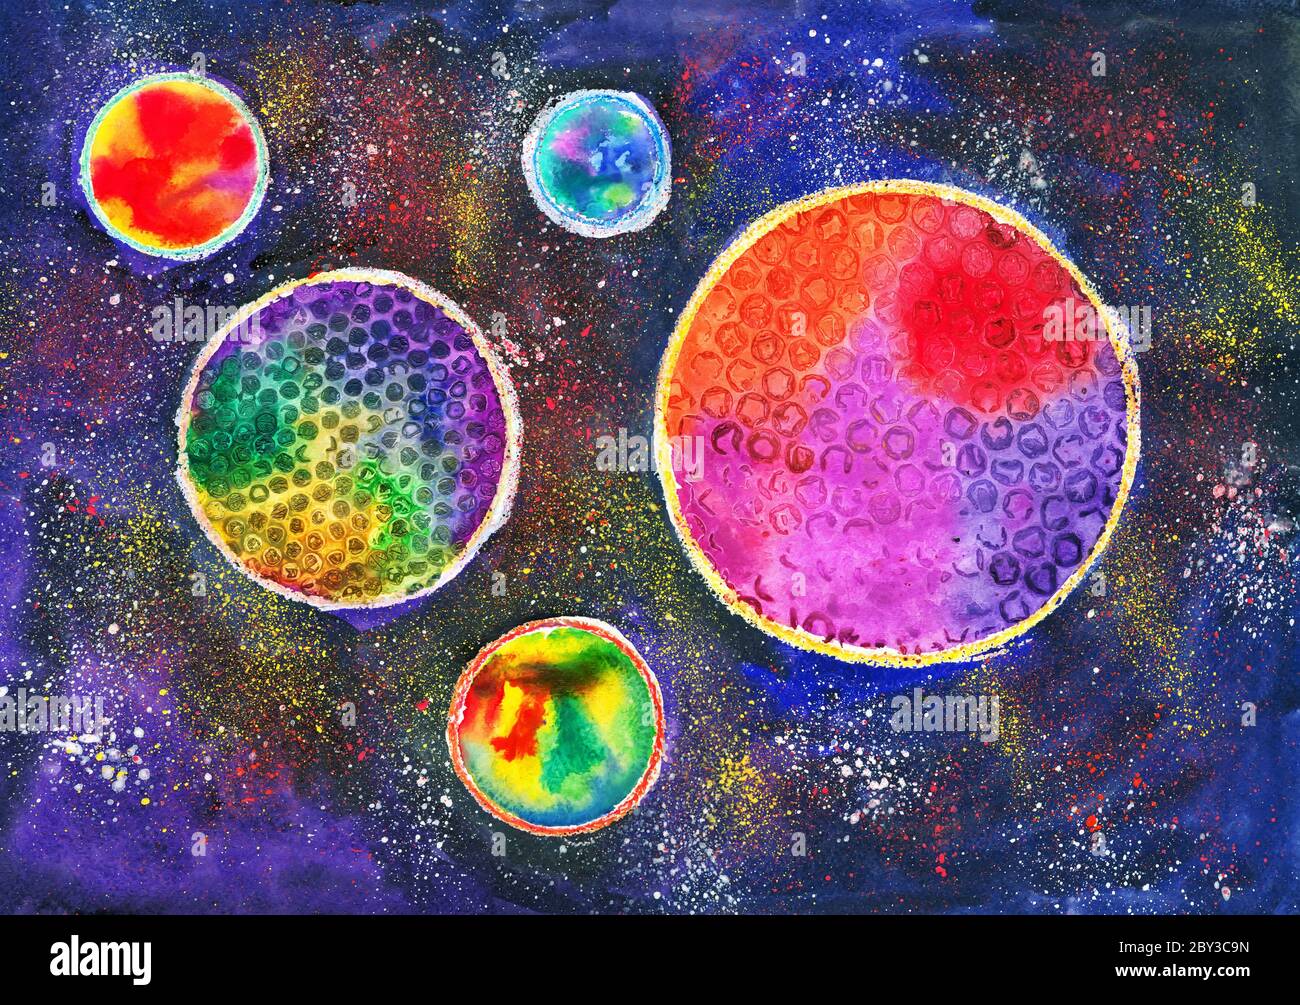 Painting of the planets in space Stock Photo